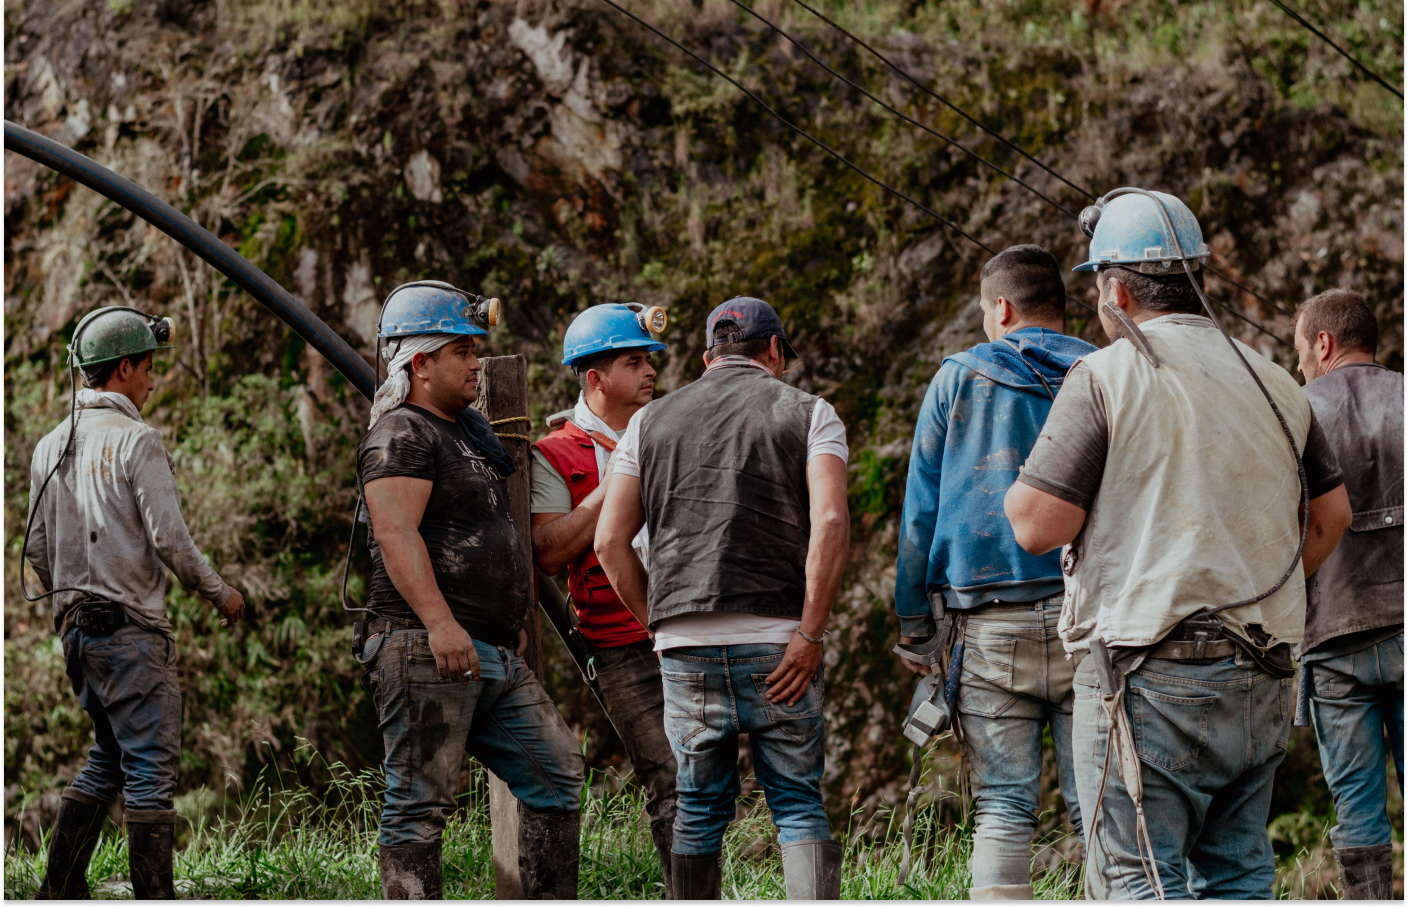 Emerald miners giving instructions before going inside the mine in Chivor, Colombia, courtesy of The Gem Odyssey